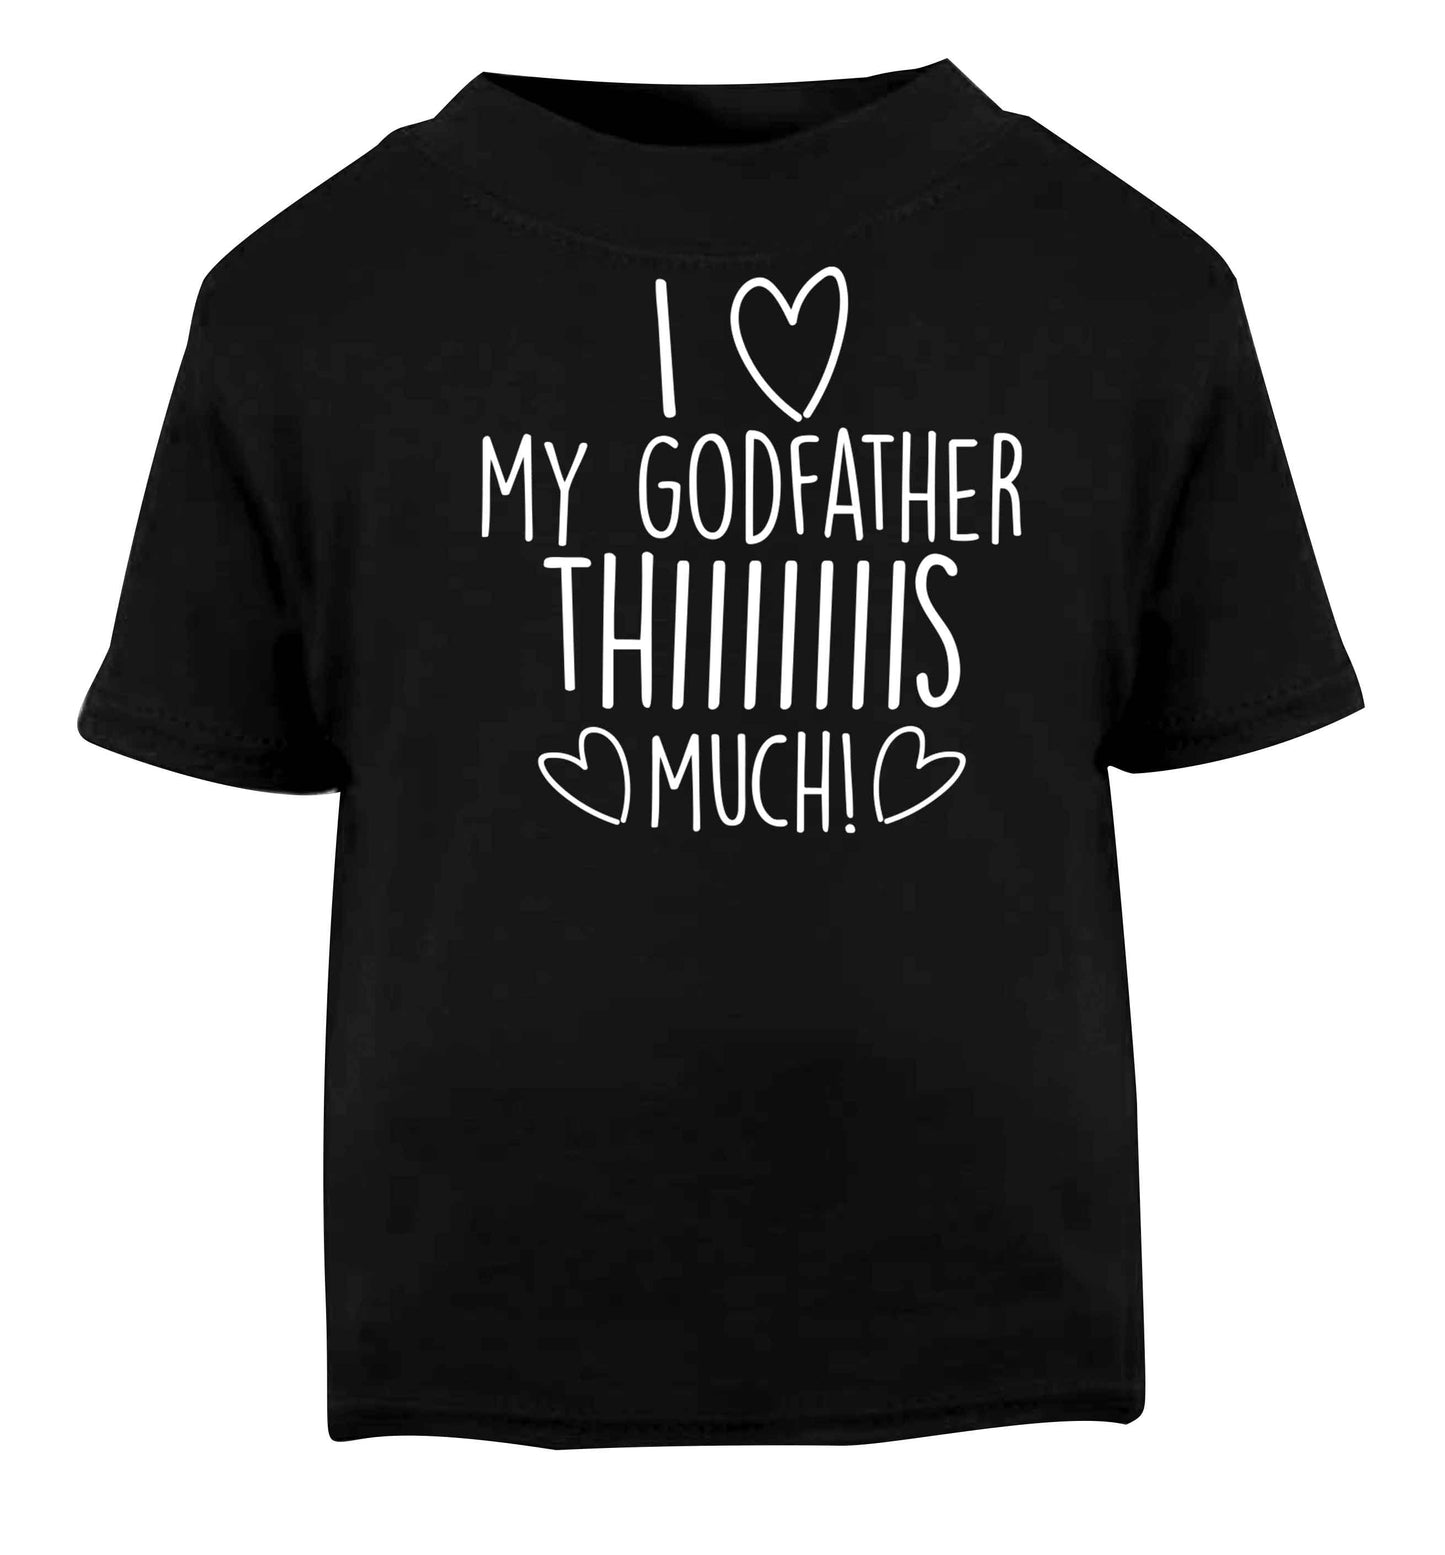 I love my Godfather this much Black baby toddler Tshirt 2 years